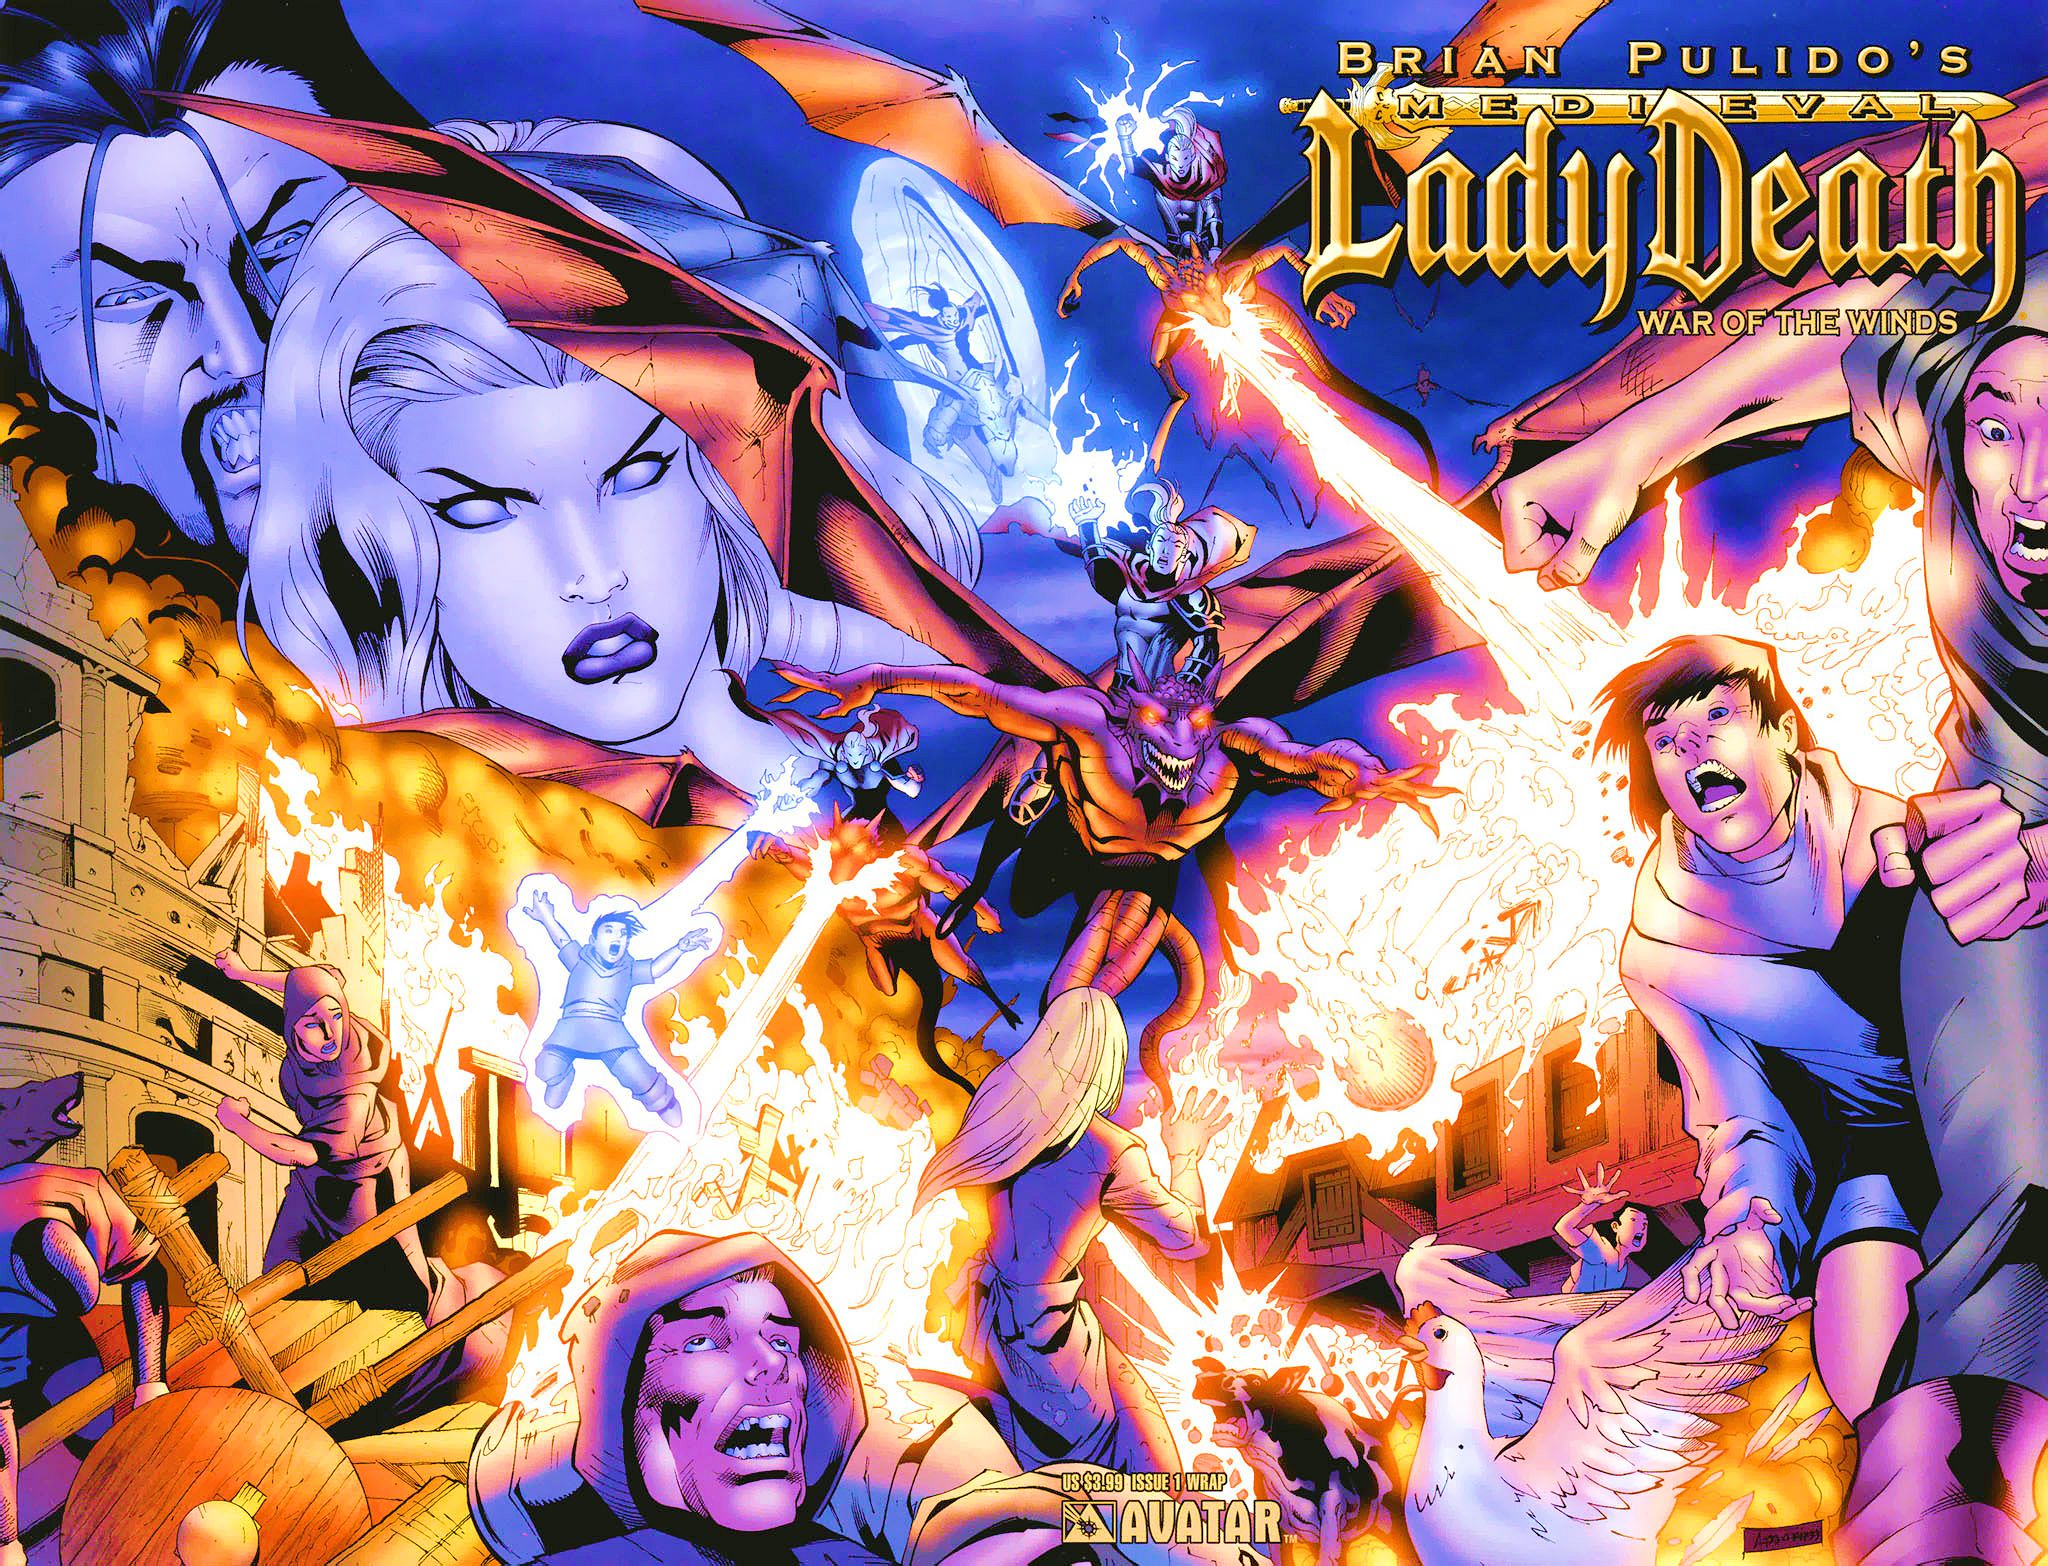 Read online Brian Pulido's Medieval Lady Death:  War of the Winds comic -  Issue #1 - 3